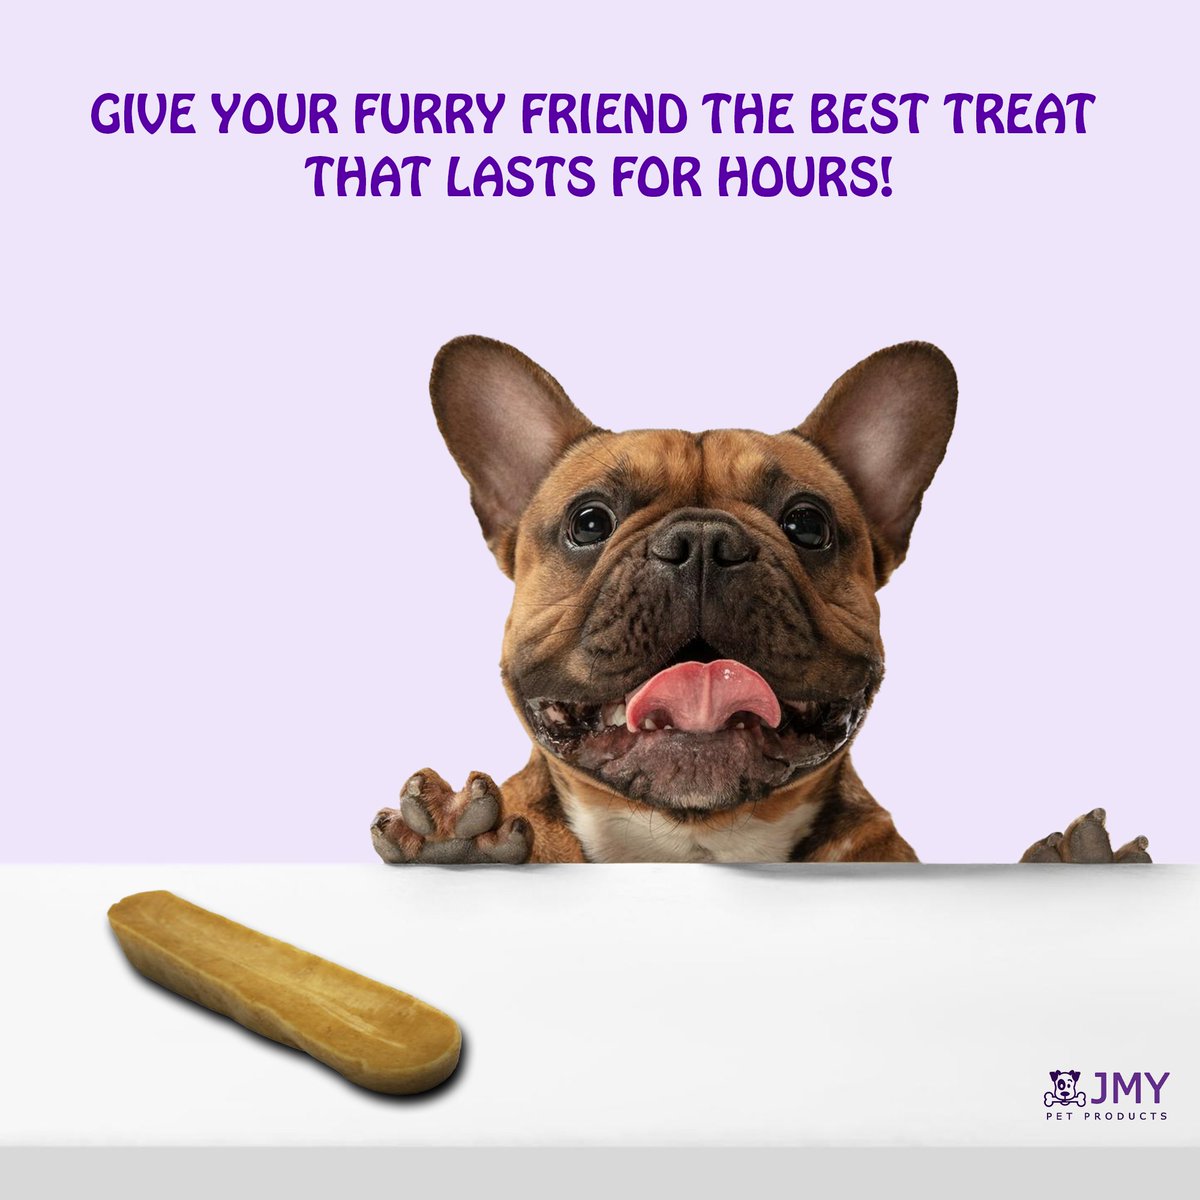 Tired of constantly restocking your pet's treats?

Upgrade to JMY Pet Products' long-lasting hard cheese chews and keep your furry friend satisfied for hours! 🐾🧀

#CheeseChews #HardCheeseTreats #LongLastingChews #CheeseLovers #DogTreats #HealthyPets #NaturalChews #PetSnacks